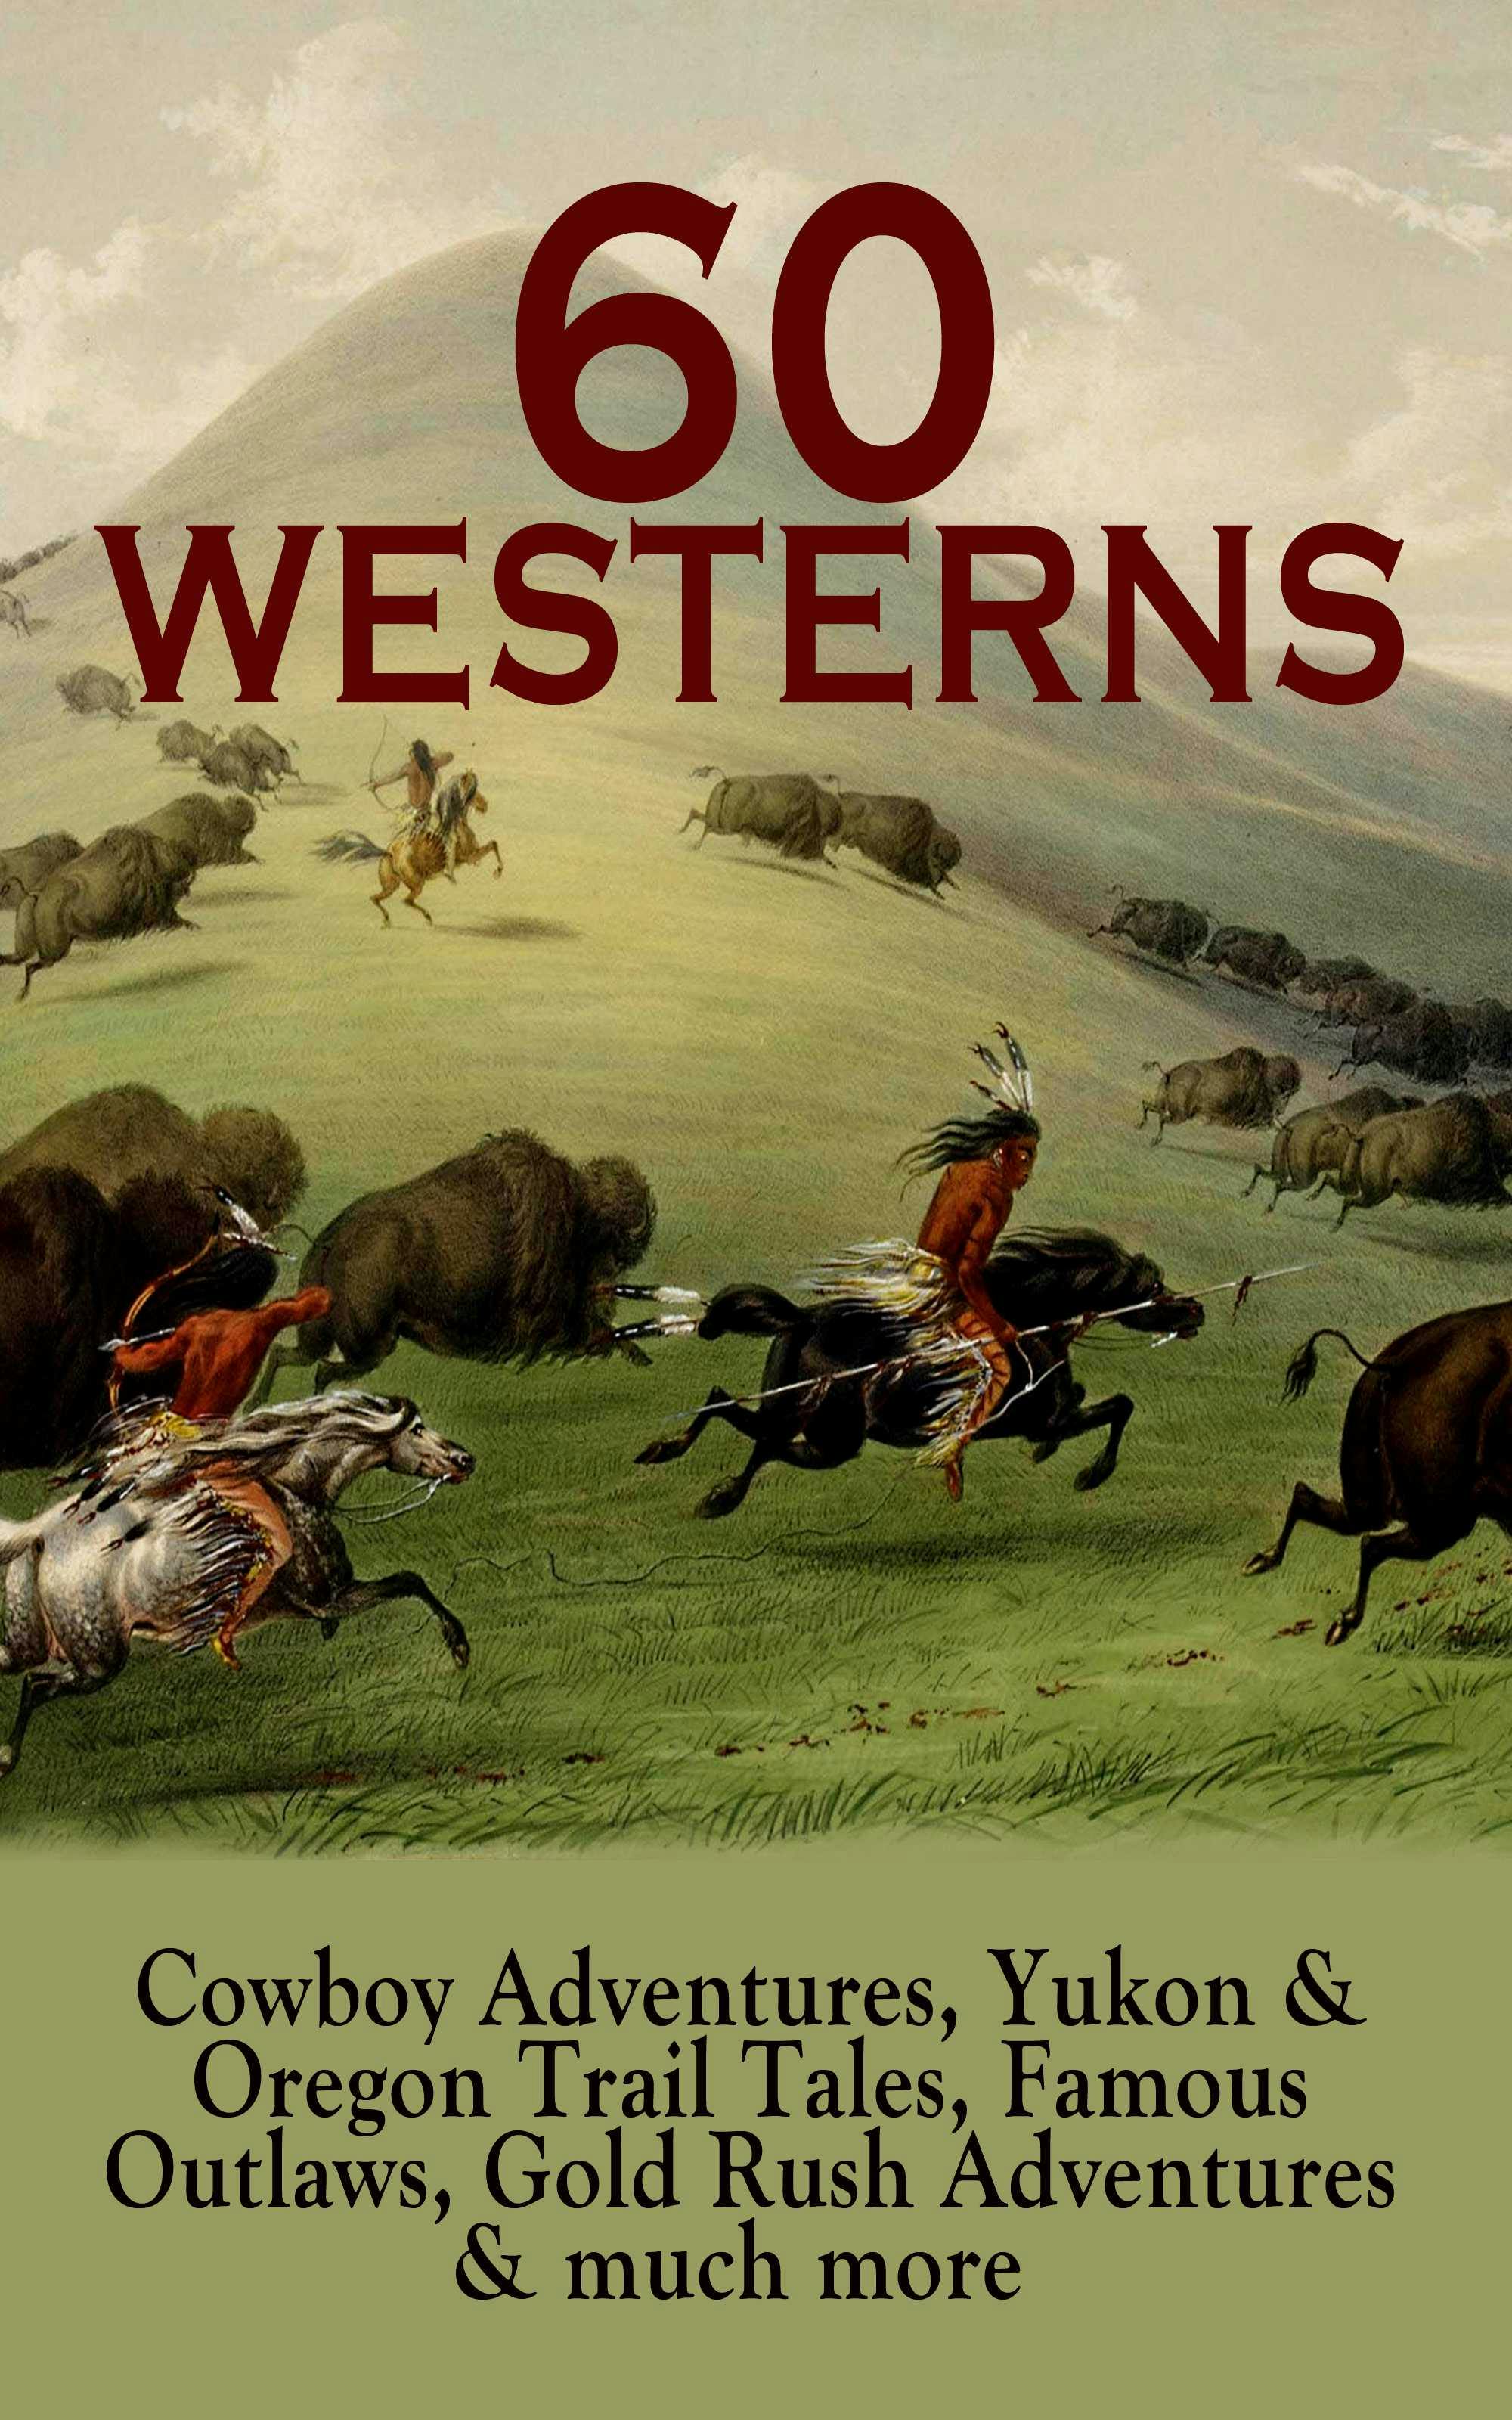 60 WESTERNS: Cowboy Adventures, Yukon & Oregon Trail Tales, Famous Outlaws, Gold Rush Adventures: Riders of the Purple Sage, The Night Horseman, The Last of the Mohicans, Rimrock Trail, The Hidden Children, The Law of the Land, Heart of the West, A Texas Cow-Boy, The Prairie… - Robert W. Chambers, Frederic Remington, Stephen Crane, Grace Livingston Hill, O. Henry, Max Brand, Frank H. Spearman, Frederic Homer Balch, Andy Adams, Dane Coolidge, Emerson Hough, Jackson Gregory, Forrestine C. Hooker, Robert E. Howard, James Fenimore Cooper, J. Allan Dunn, Charles Siringo, Will Lillibridge, Mark Twain, Washington Irving, James Oliver Curwood, B. M. Bower, Marah Ellis Ryan, Zane Grey, Jack London, Willa Cather, Charles Alden Seltzer, Bret Harte, Owen Wister, R.M. Ballantyne